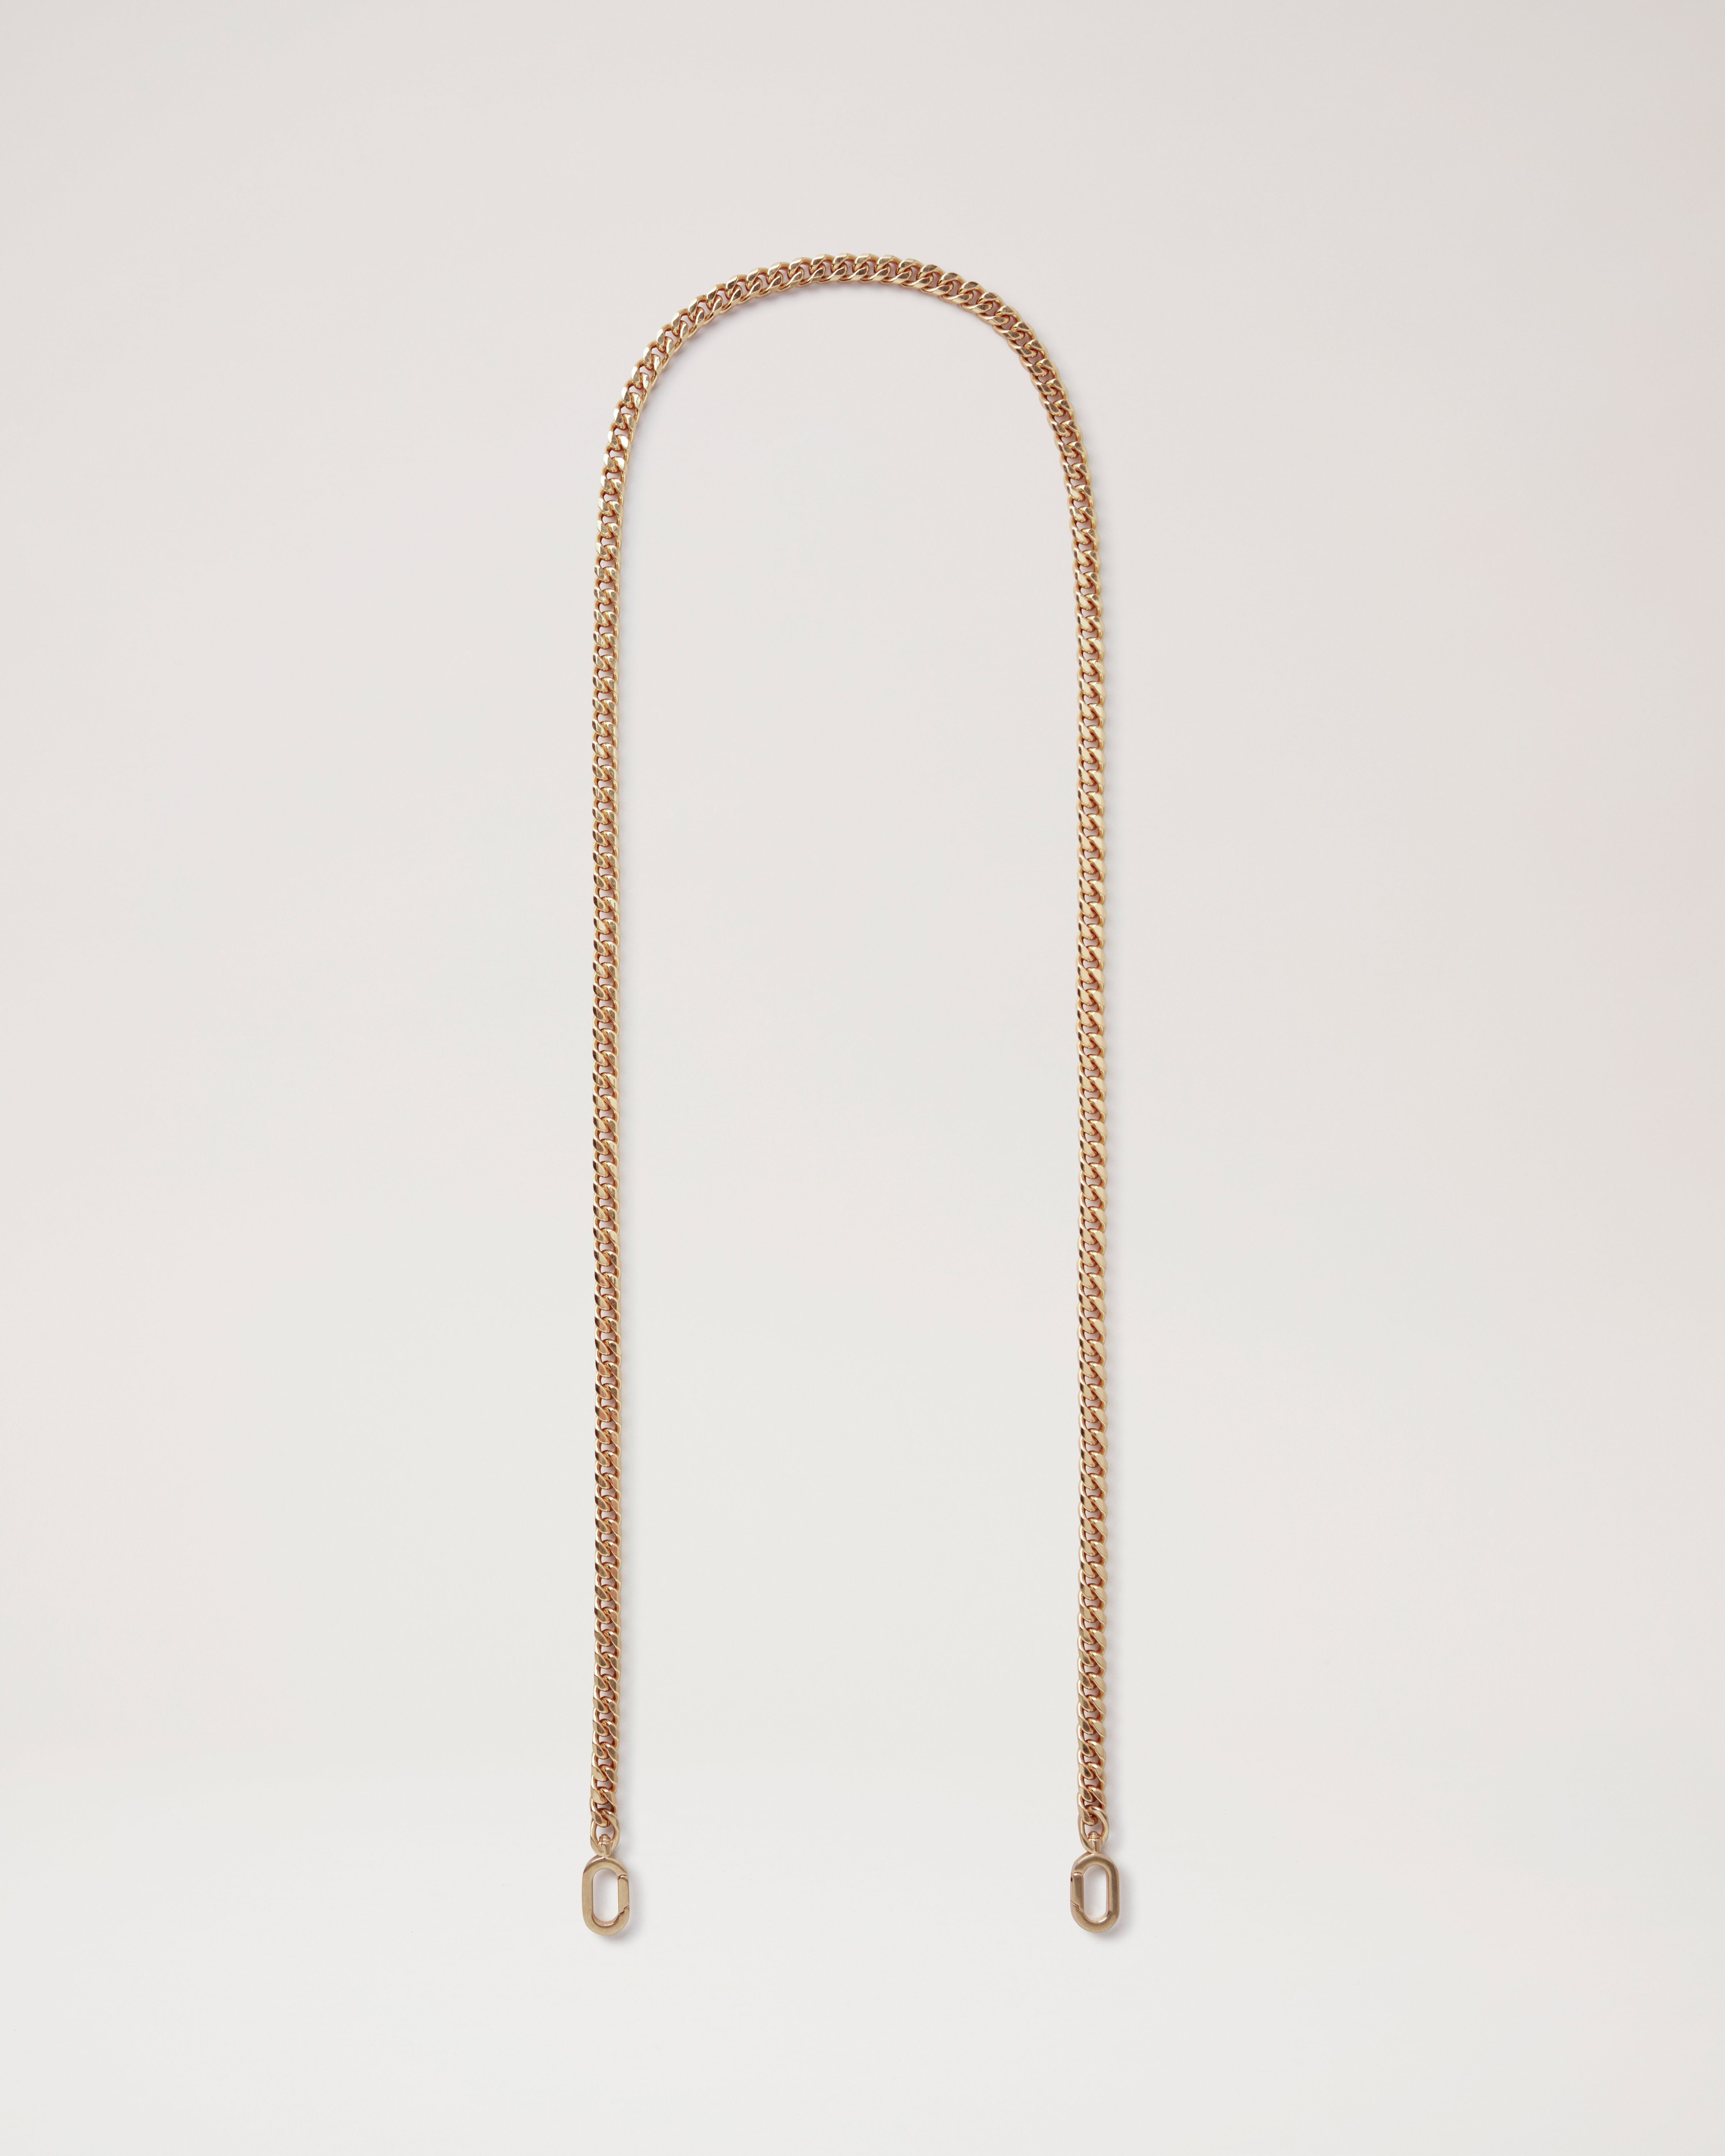 Mulberry Flat Chain Strap - New Silver